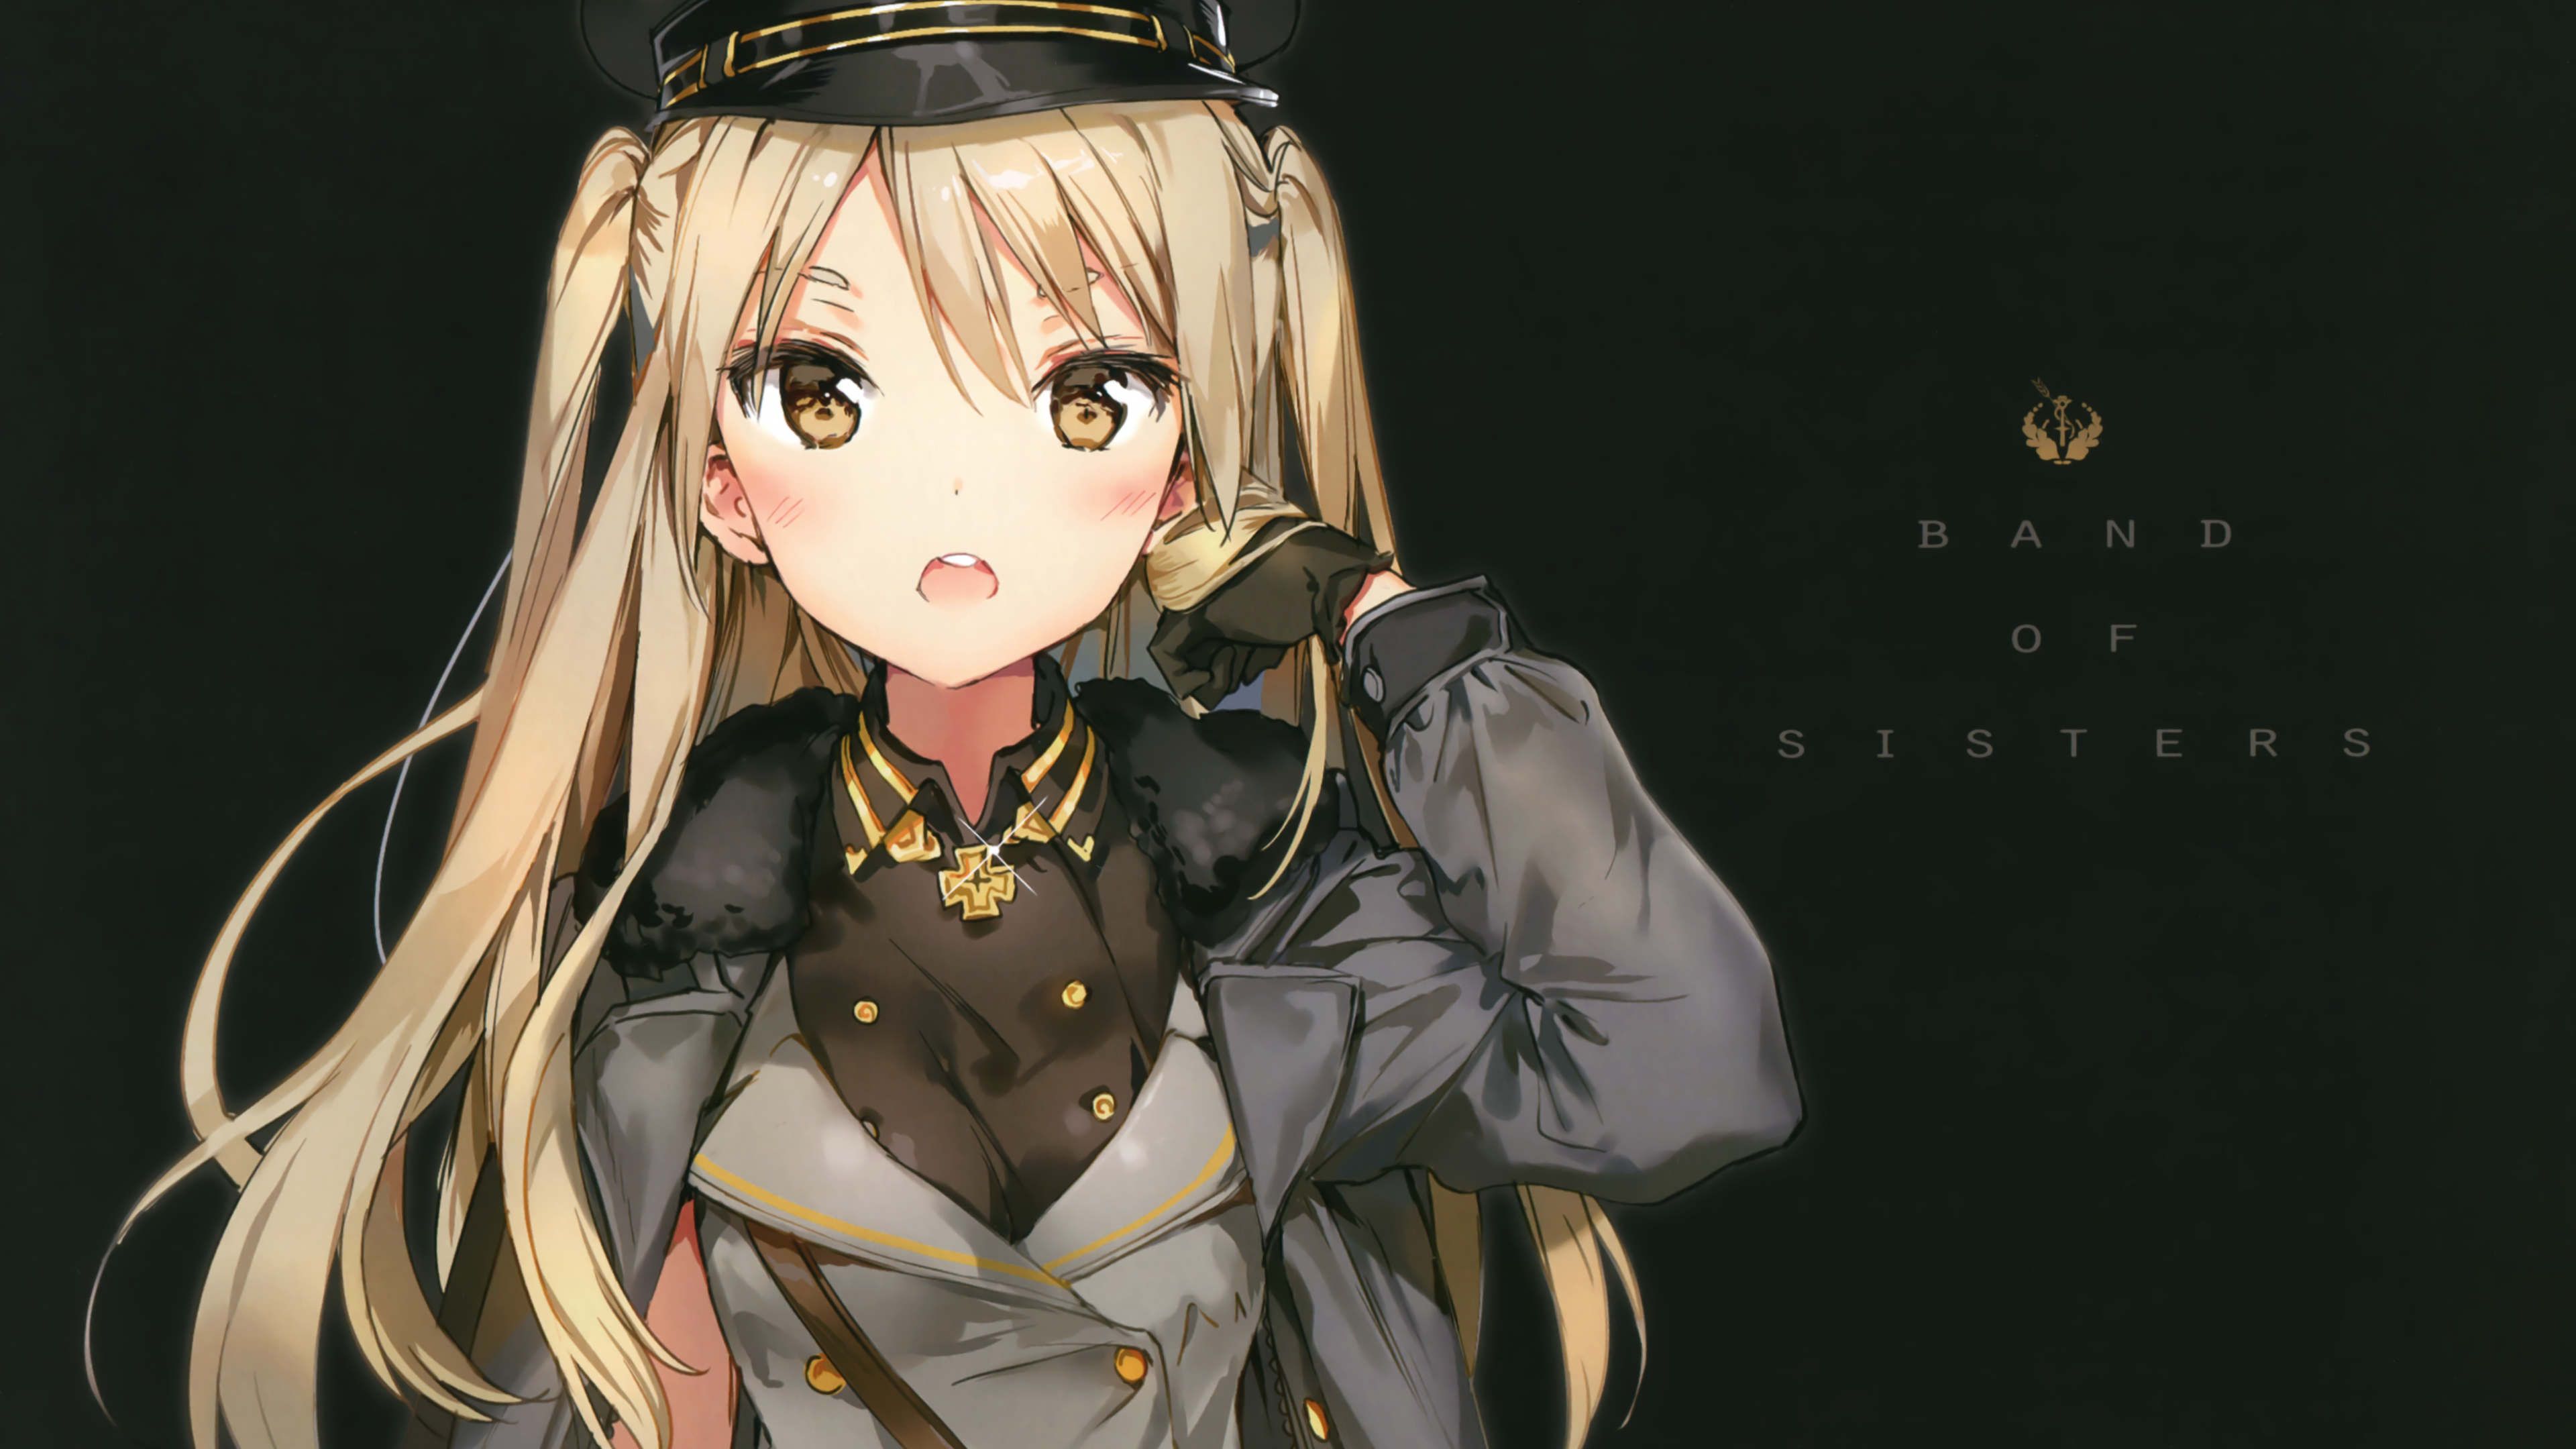 Download 3840x2160 Anime Girl, Blonde, Military Uniform, Twintails, Hat Wallpaper for UHD TV